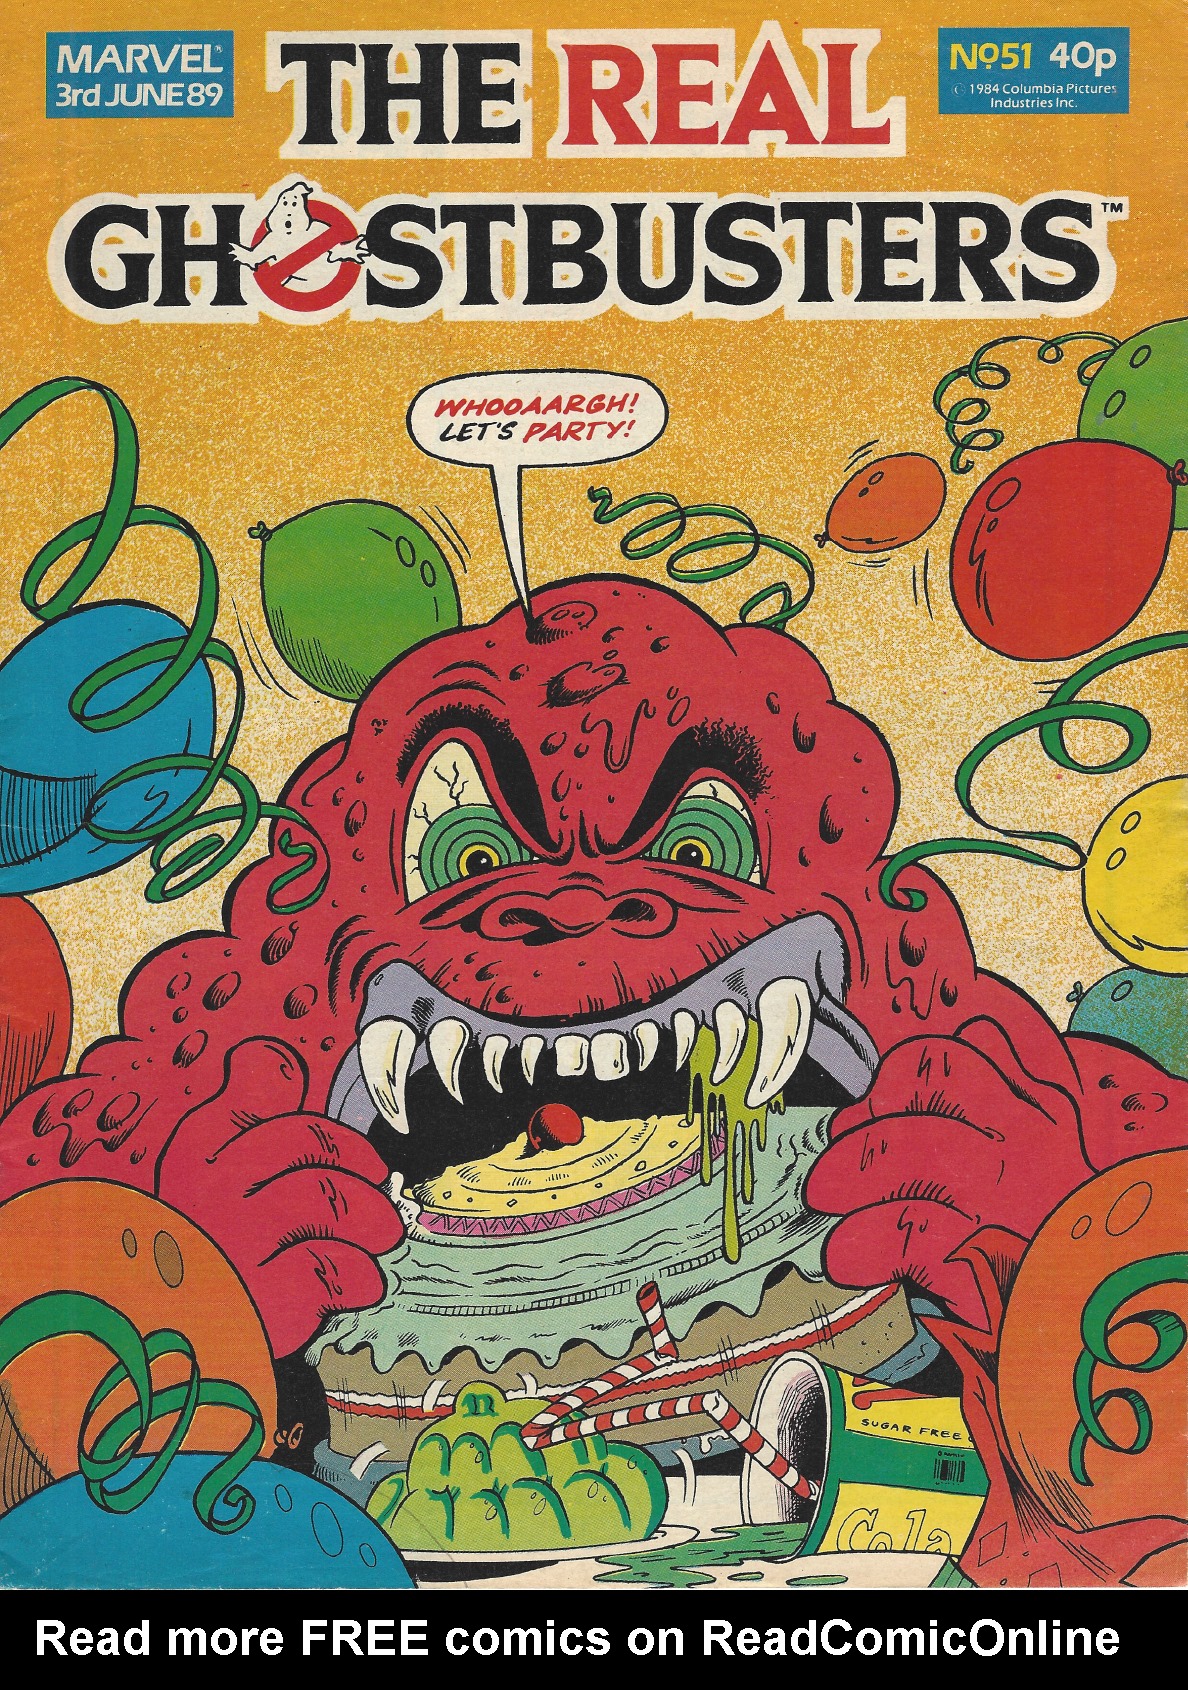 Read online The Real Ghostbusters comic -  Issue #51 - 1